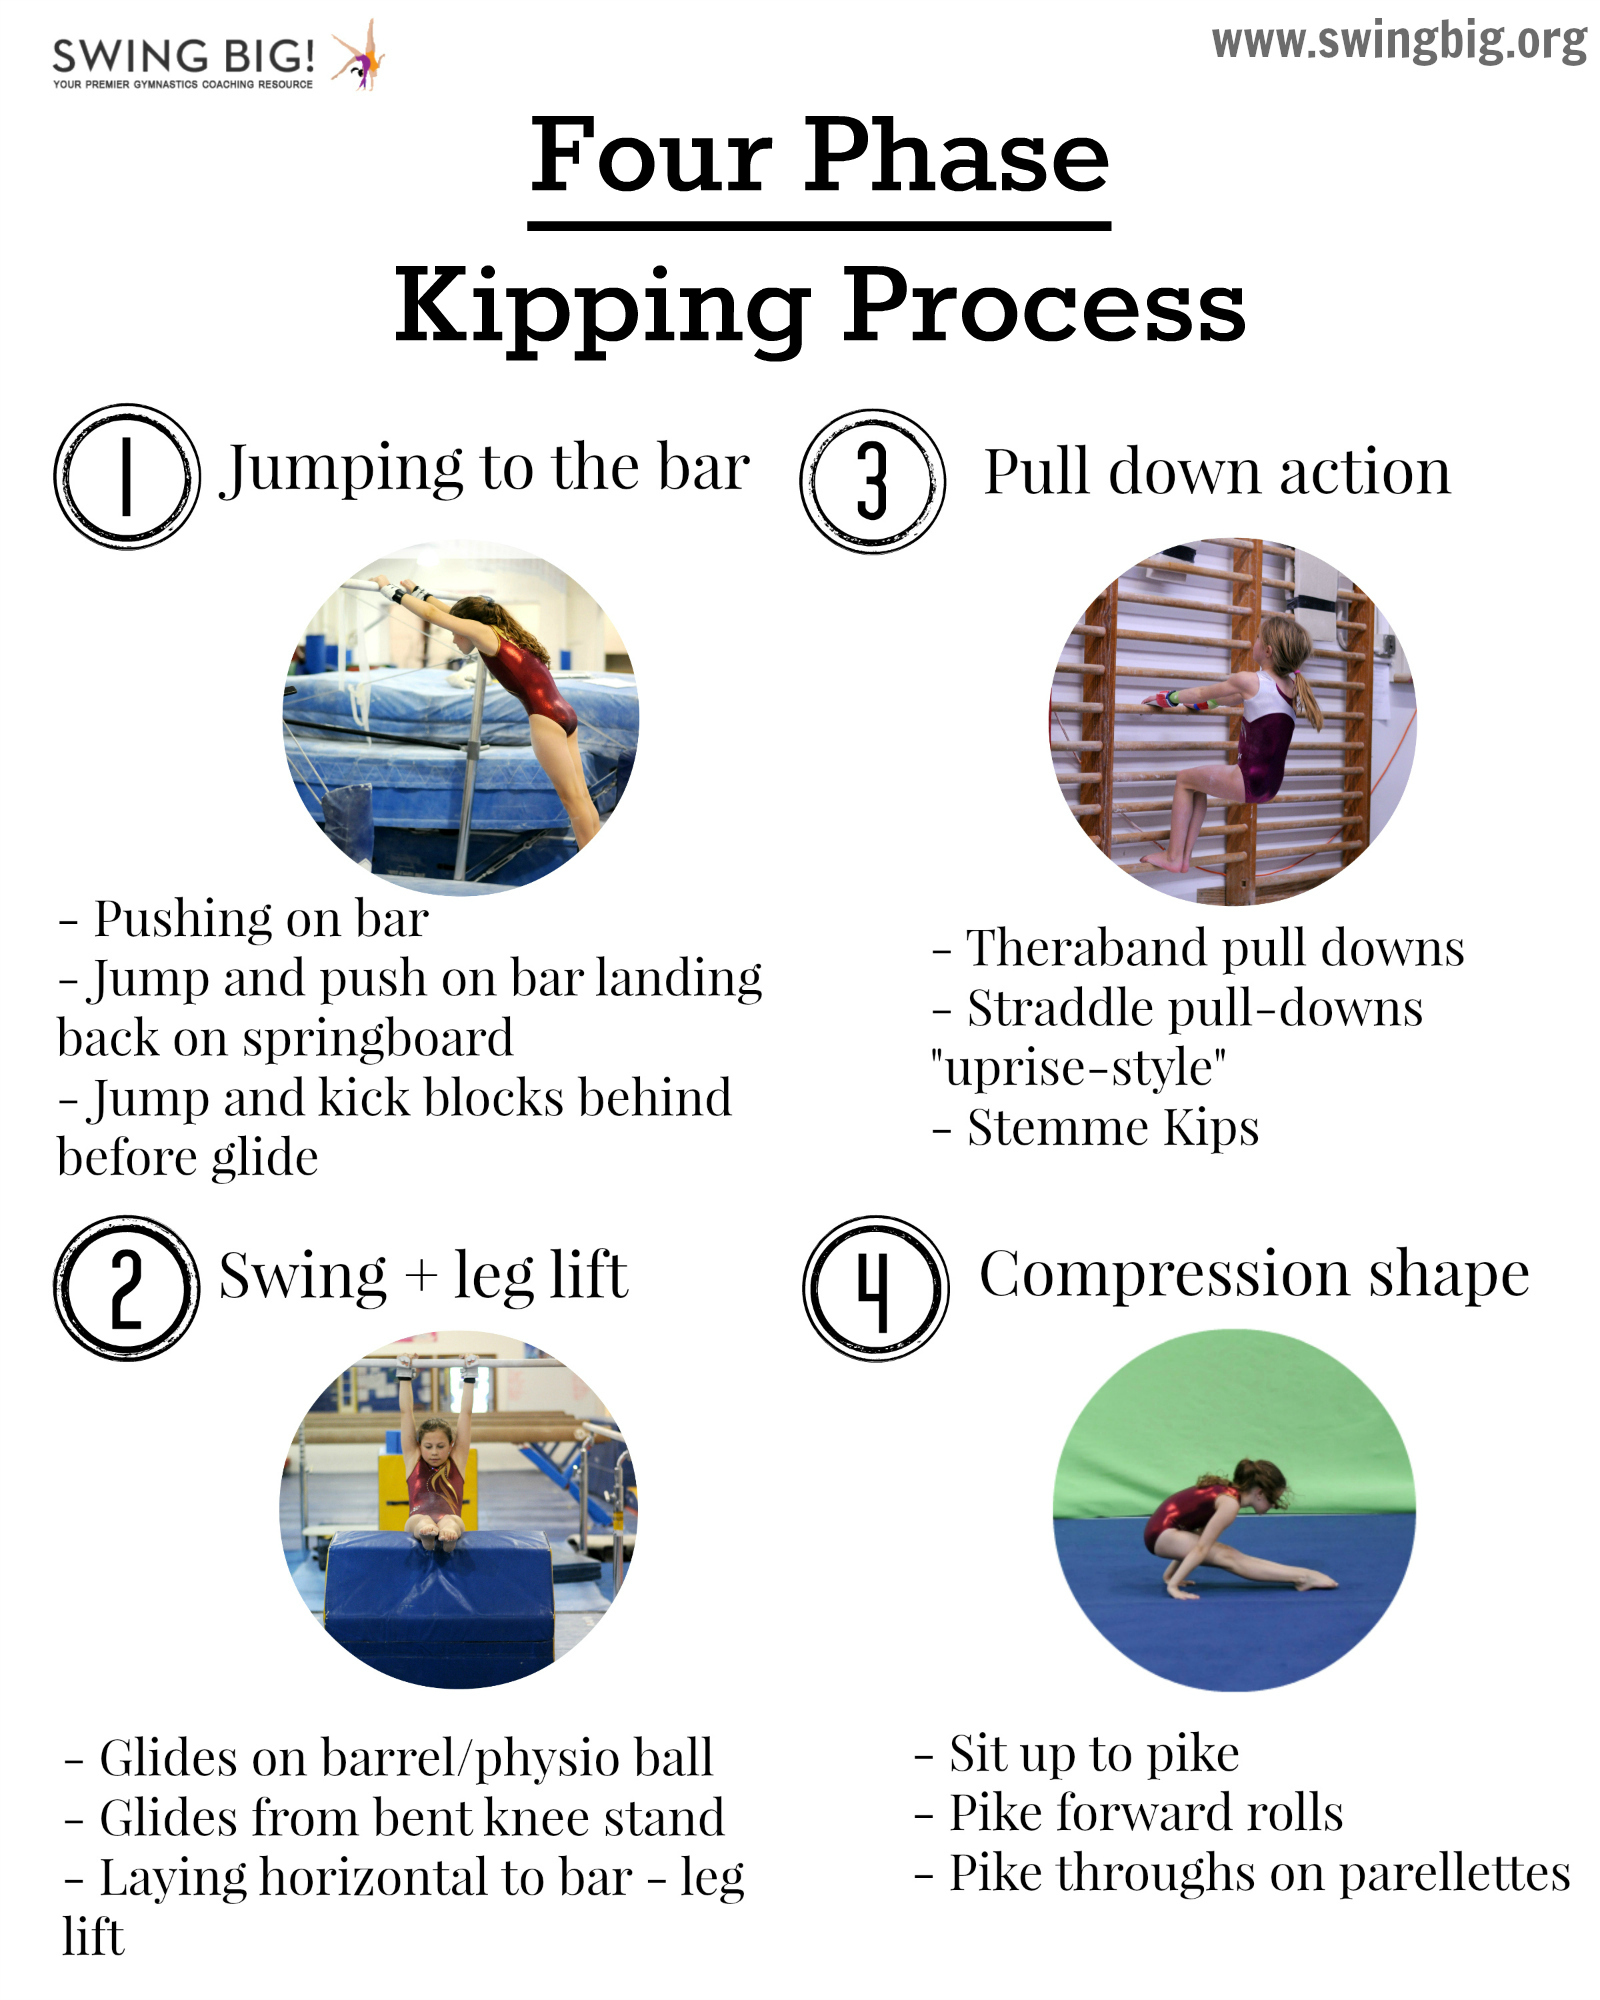 the four phase kipping process